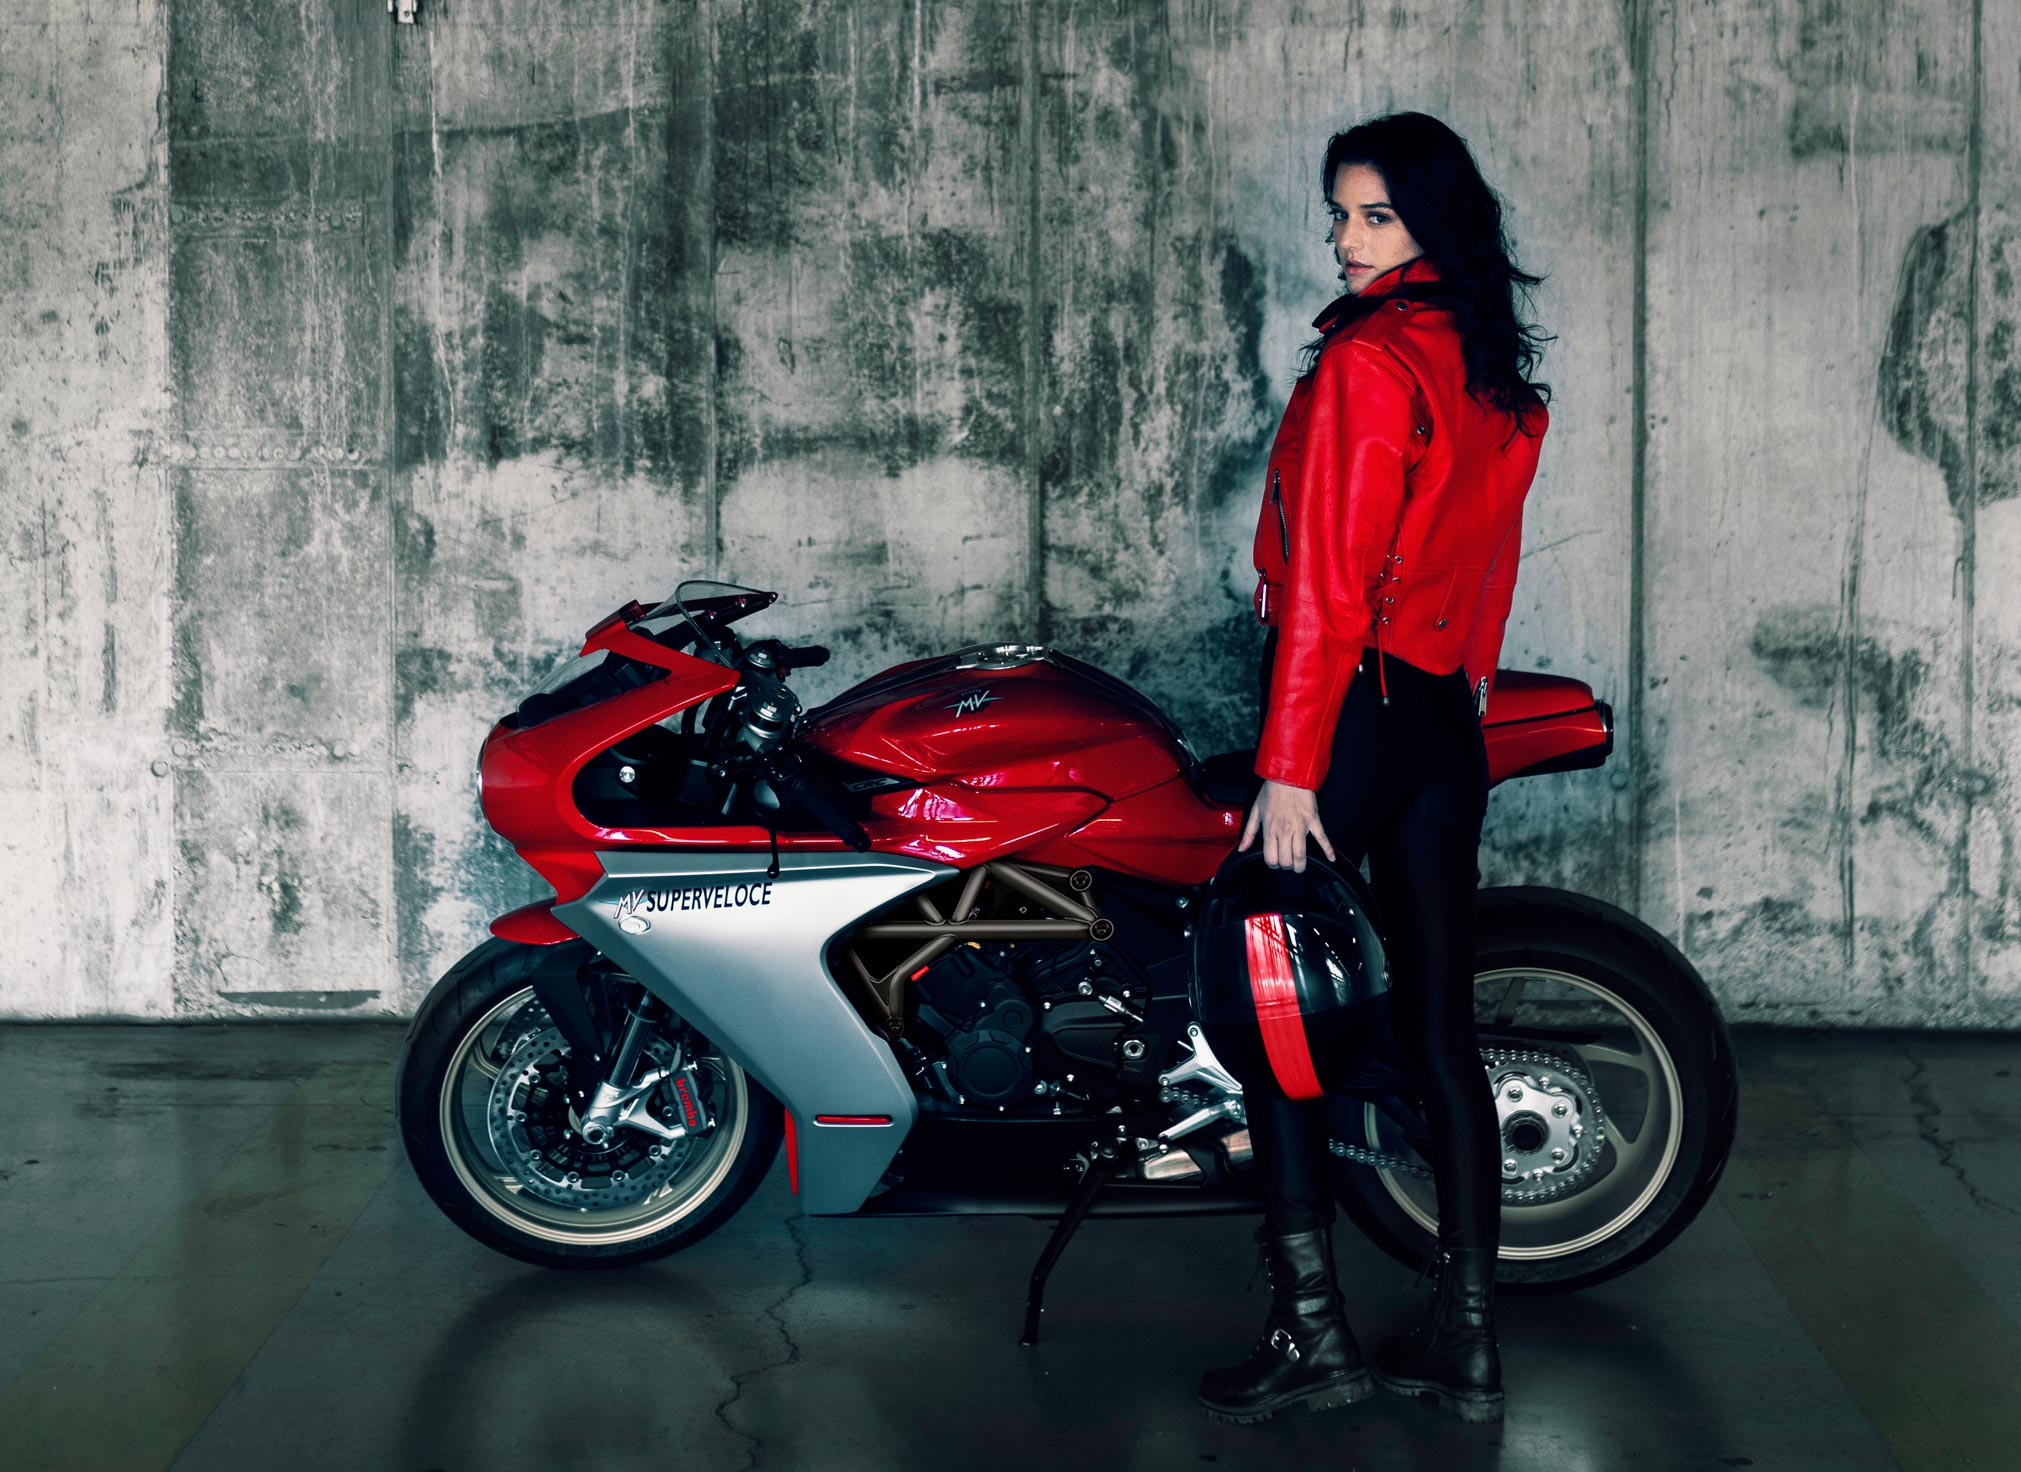 New Look for MV Agusta Superveloce 800 after Rider Sales Surge • Total Motorcycle